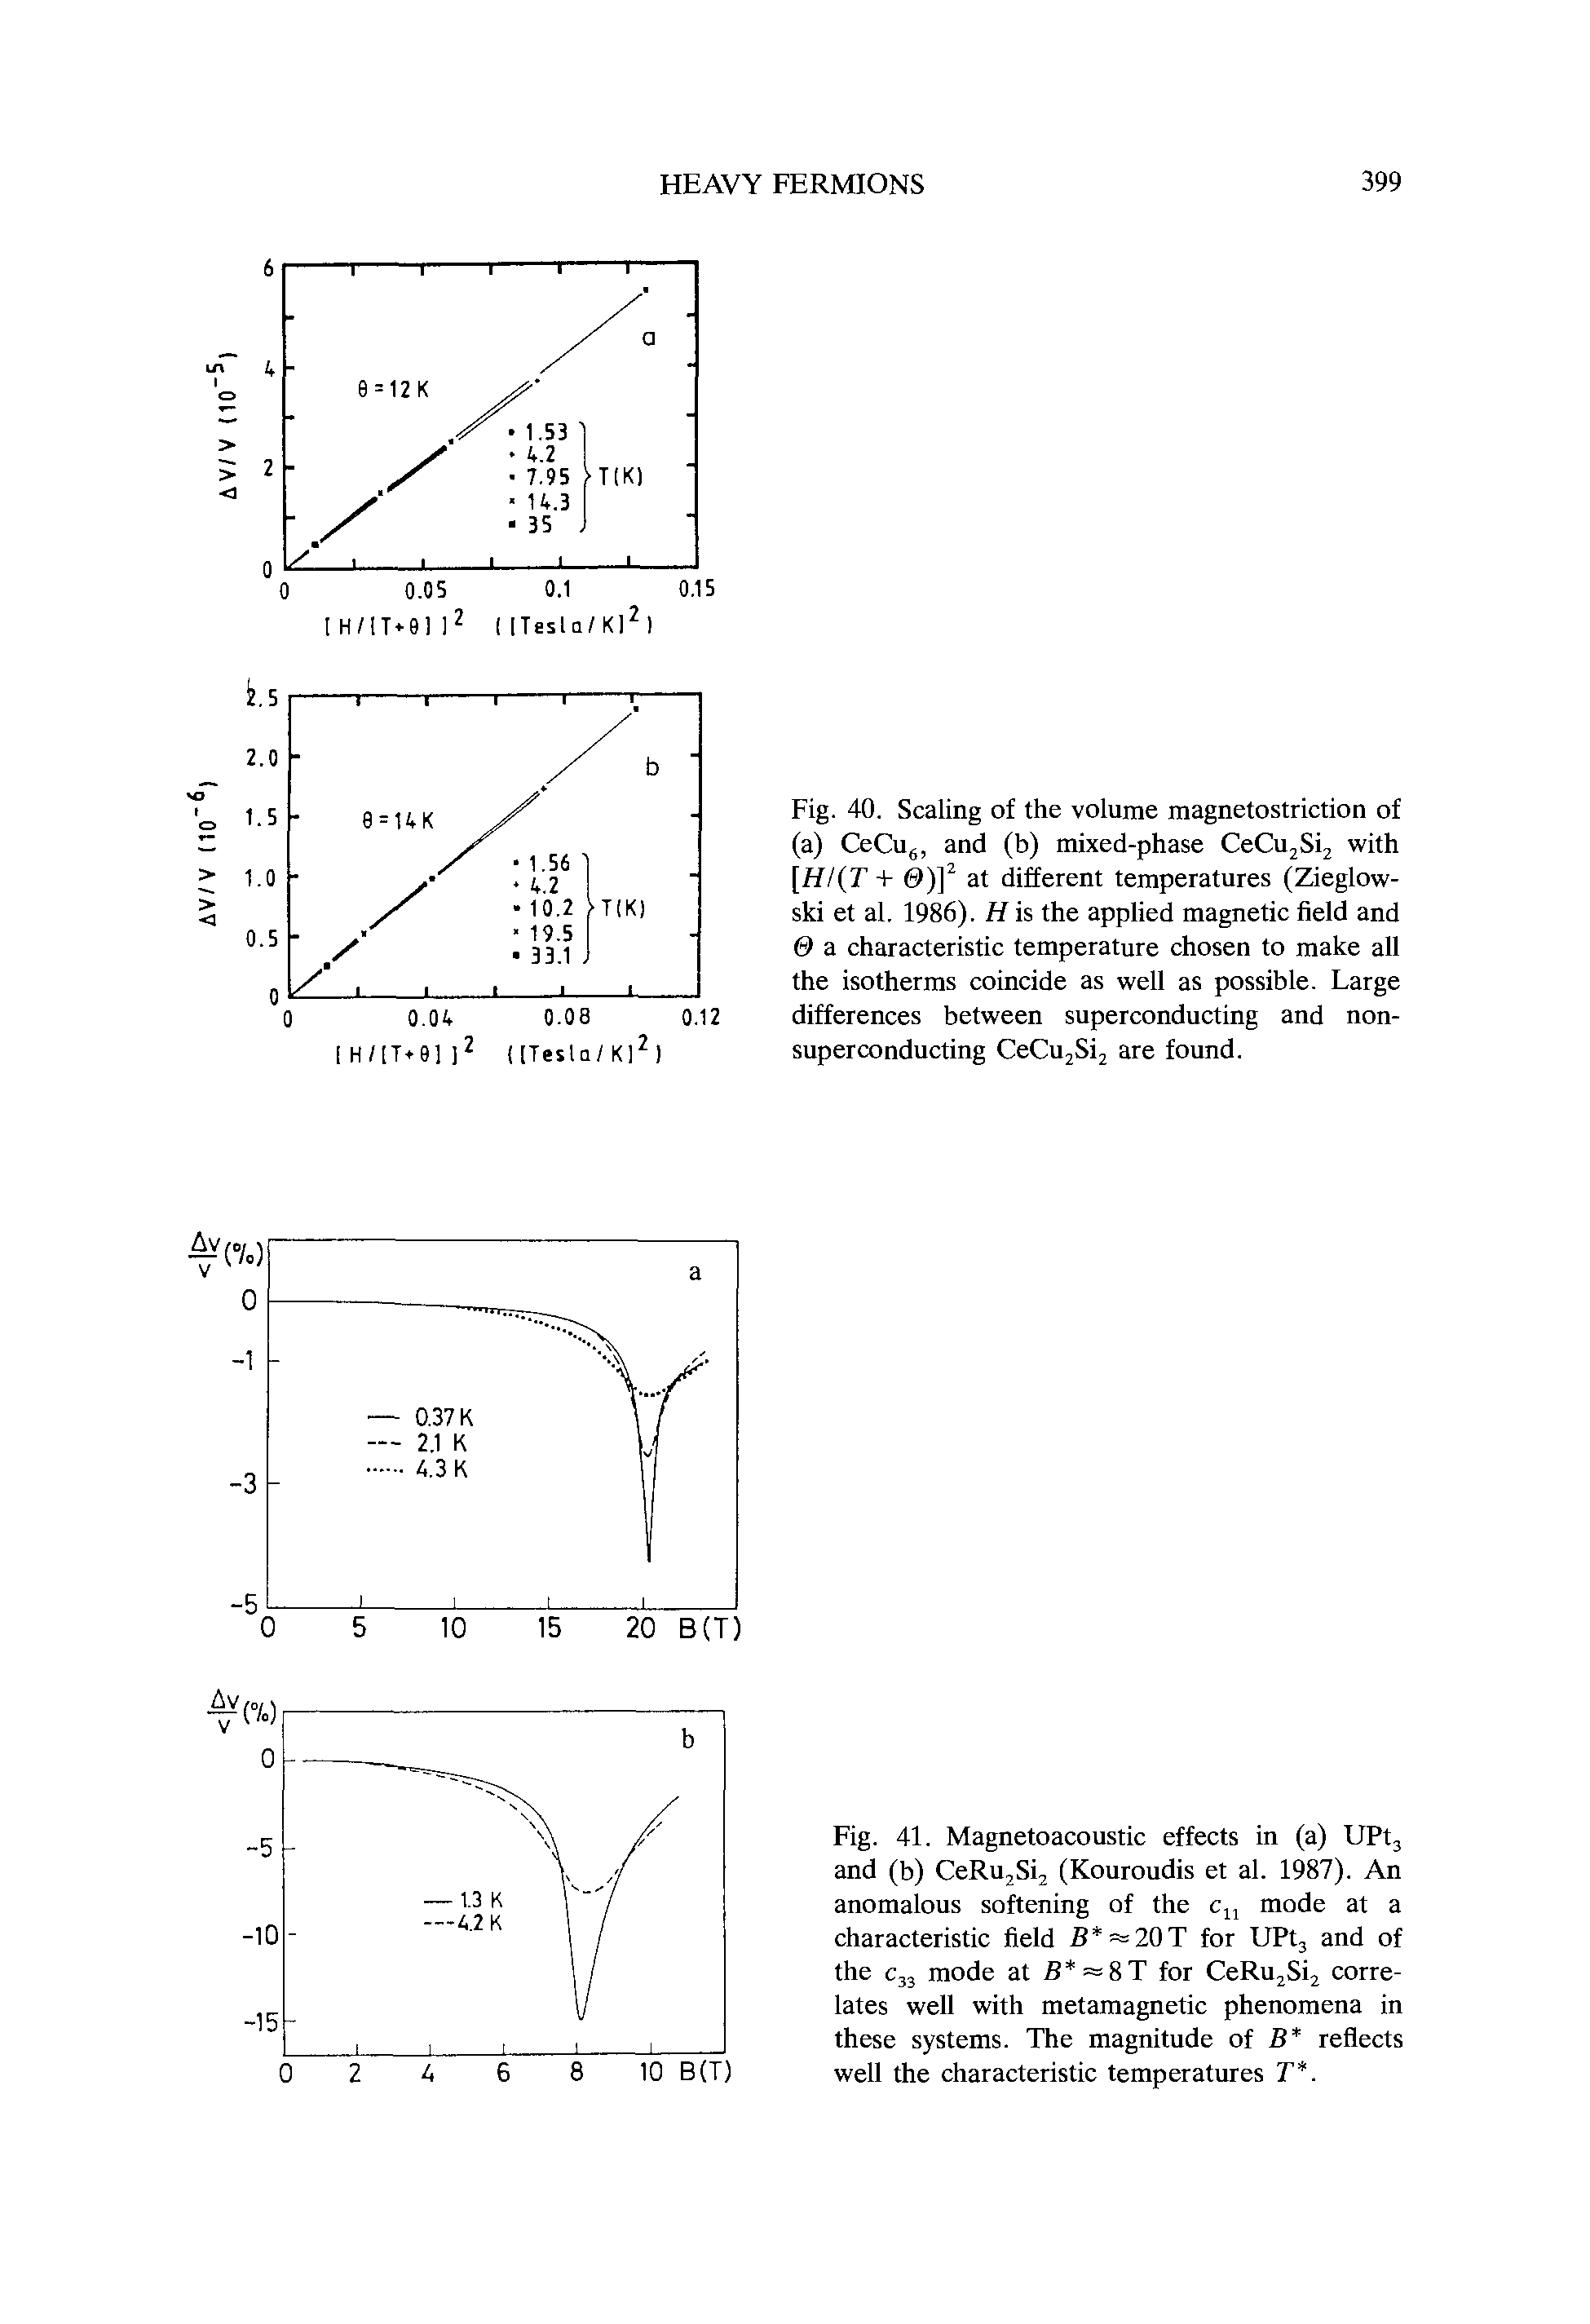 Fig. 40. Scaling of the volume magnetostriction of (a) CeCug, and (b) mixed-phase CeCu Sij with H T + 0)] at different temperatures (Zieglow-ski et al. 1986). H is the applied magnetic field and 0 a characteristic temperature chosen to make all the isotherms coincide as well as possible. Large differences between superconducting and non-superconducting CeCujSij are found.